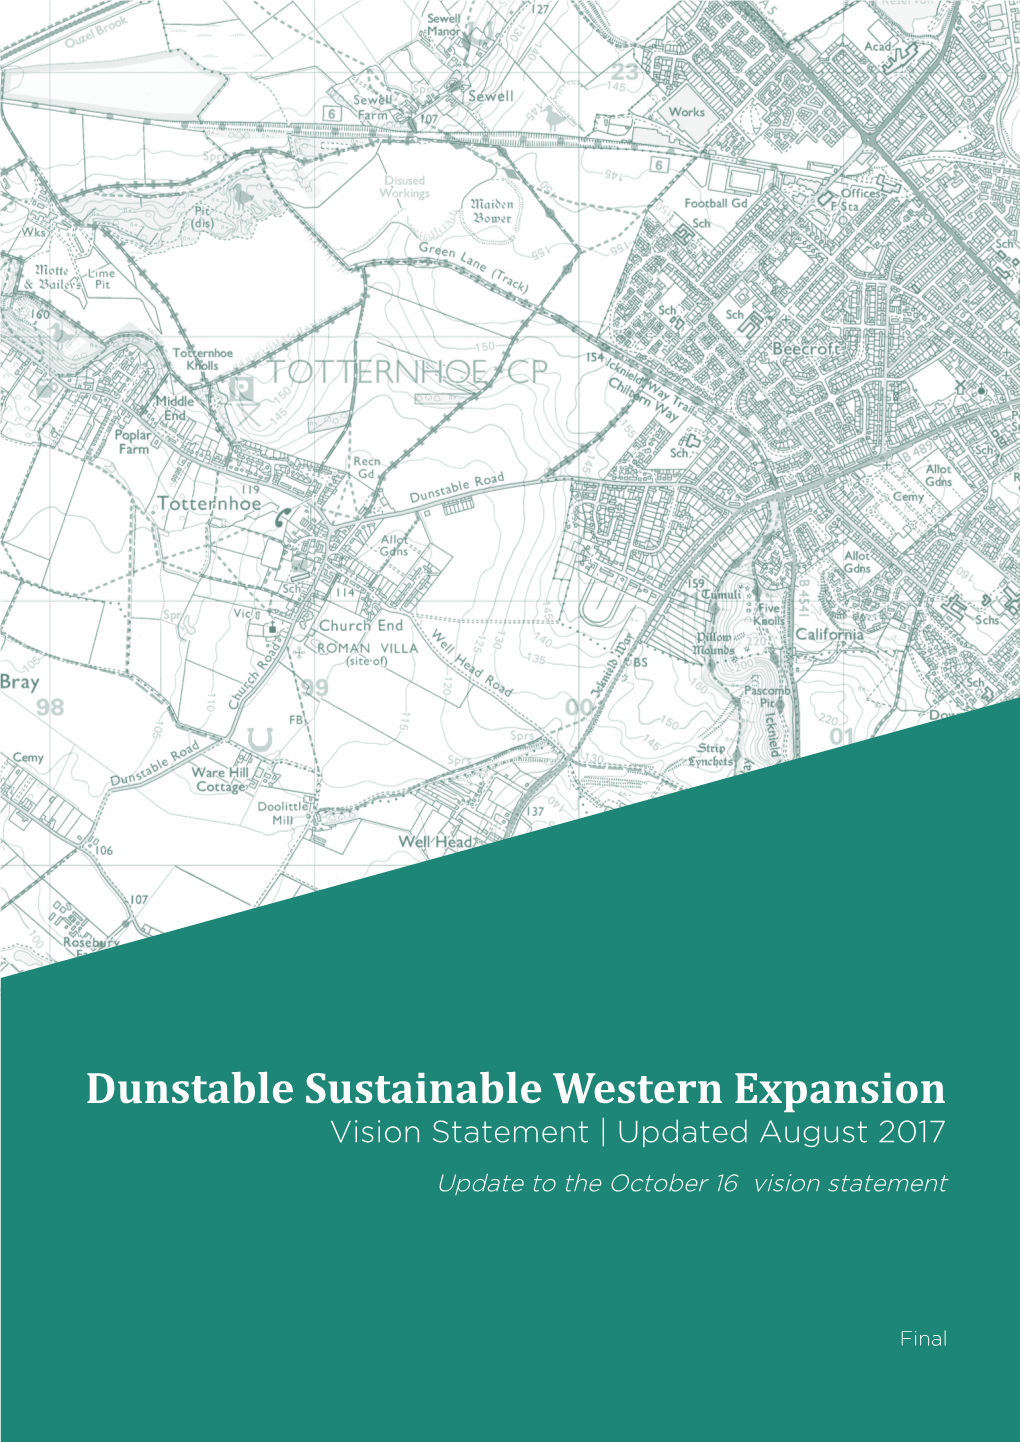 Dunstable Sustainable Western Expansion Vision Statement | Updated August 2017 Update to the October 16 Vision Statement